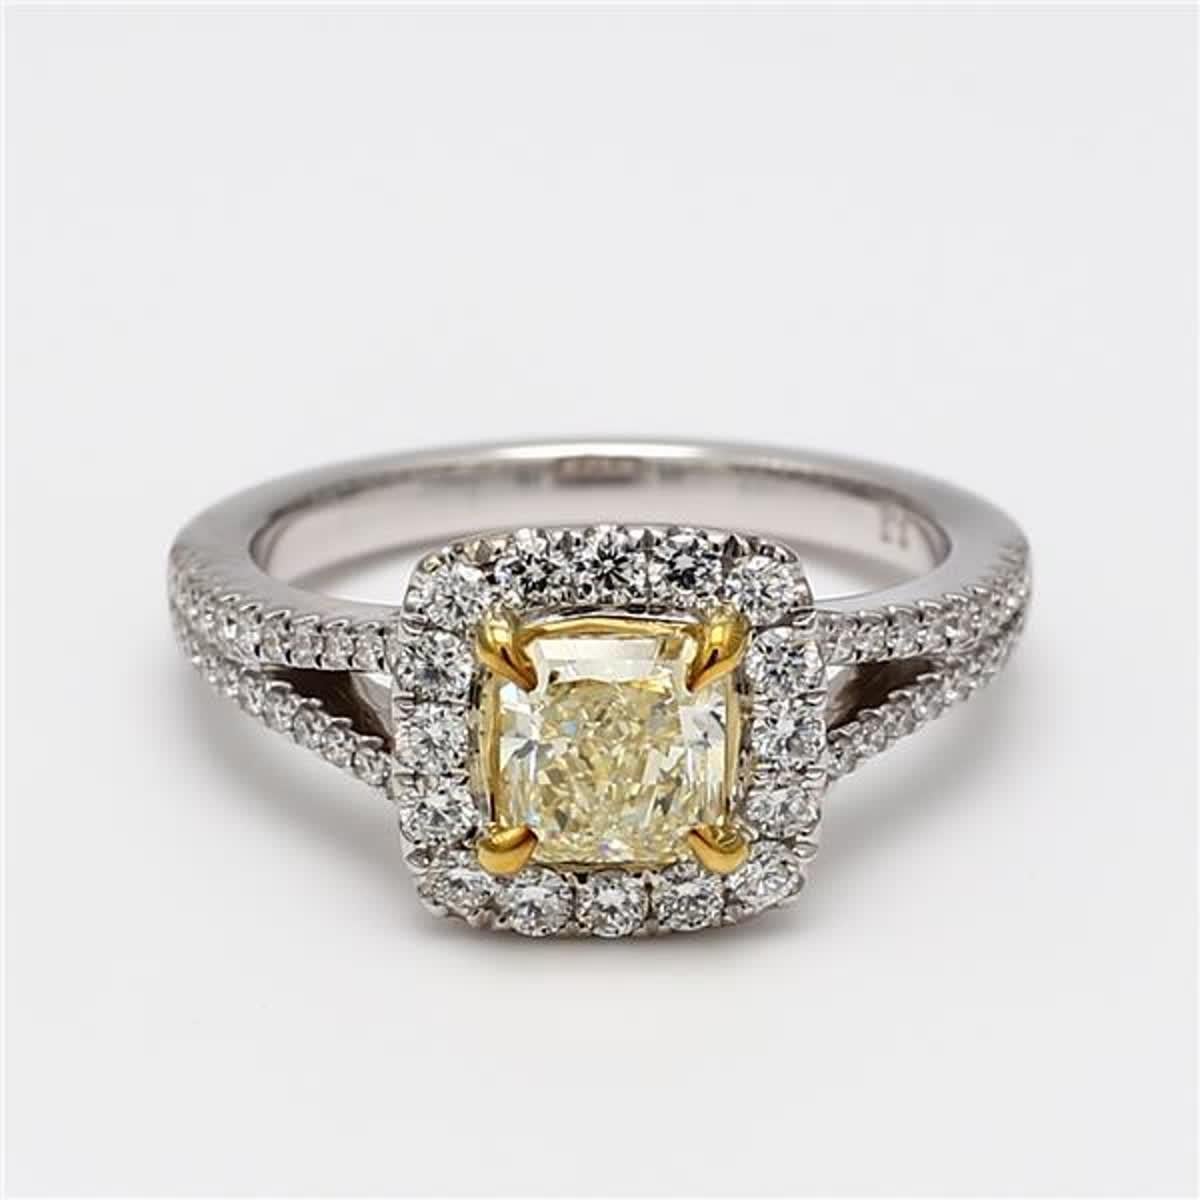 RareGemWorld's classic diamond ring. Mounted in a beautiful 18K Yellow and White Gold setting with a natural radiant cut yellow diamond. The yellow diamond is surrounded by small round natural white diamond melee. This ring is guaranteed to impress